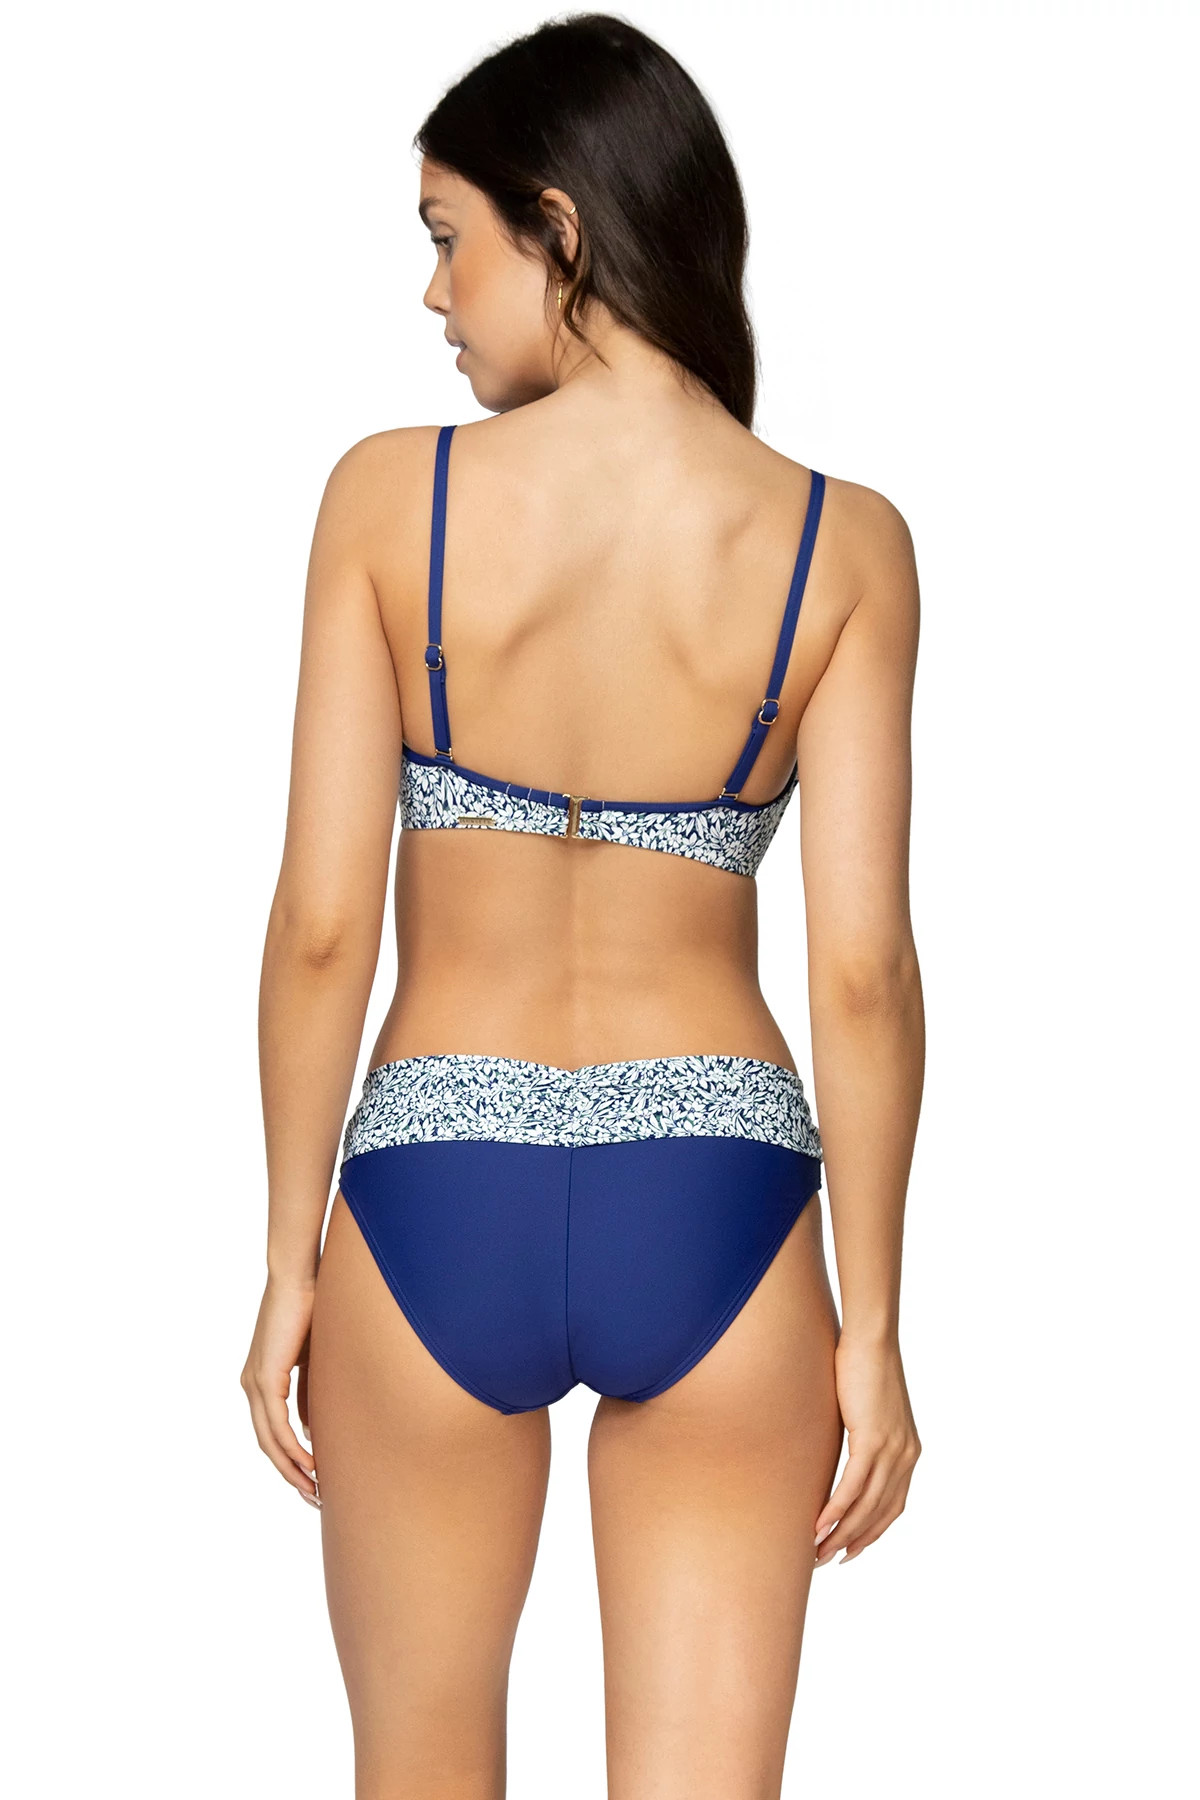 FORGET ME NOT Iconic Twist Underwire Bandeau Bikini Top (E-H Cup) image number 2